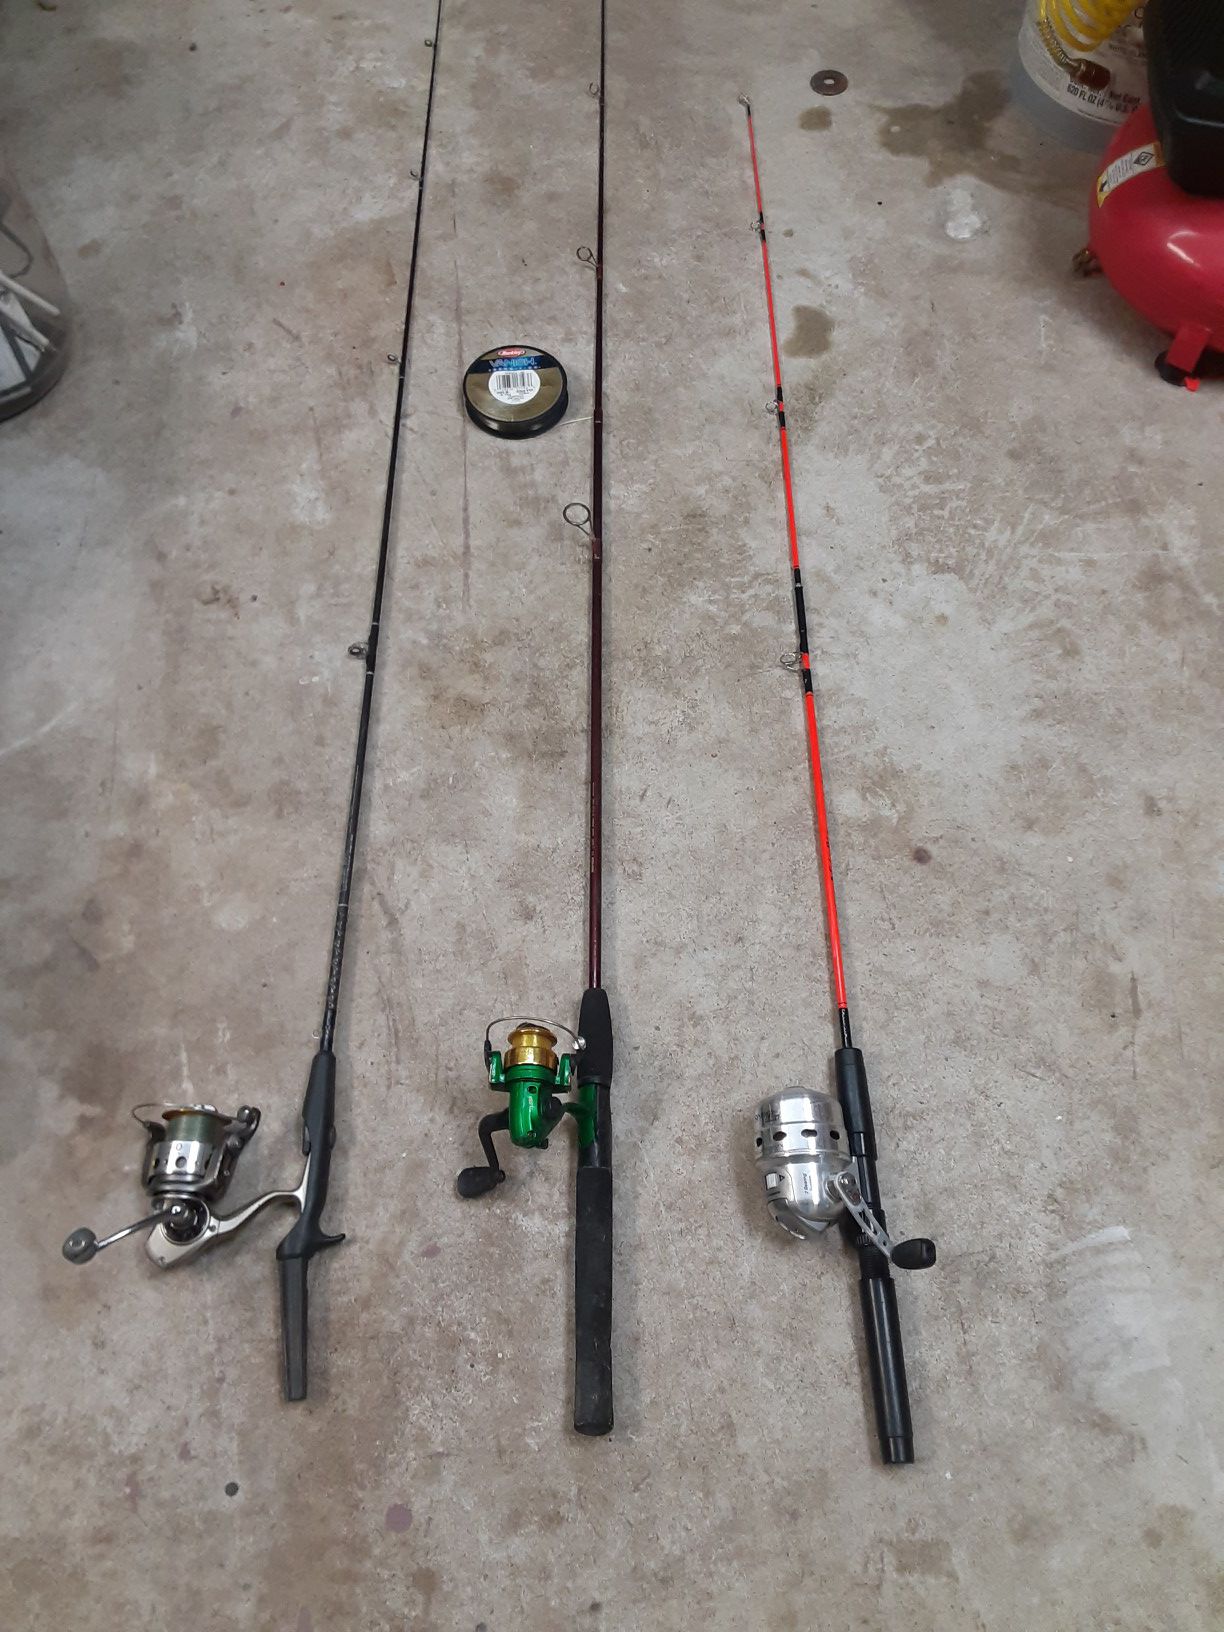 fishing poles kits (3 pack and spool line)